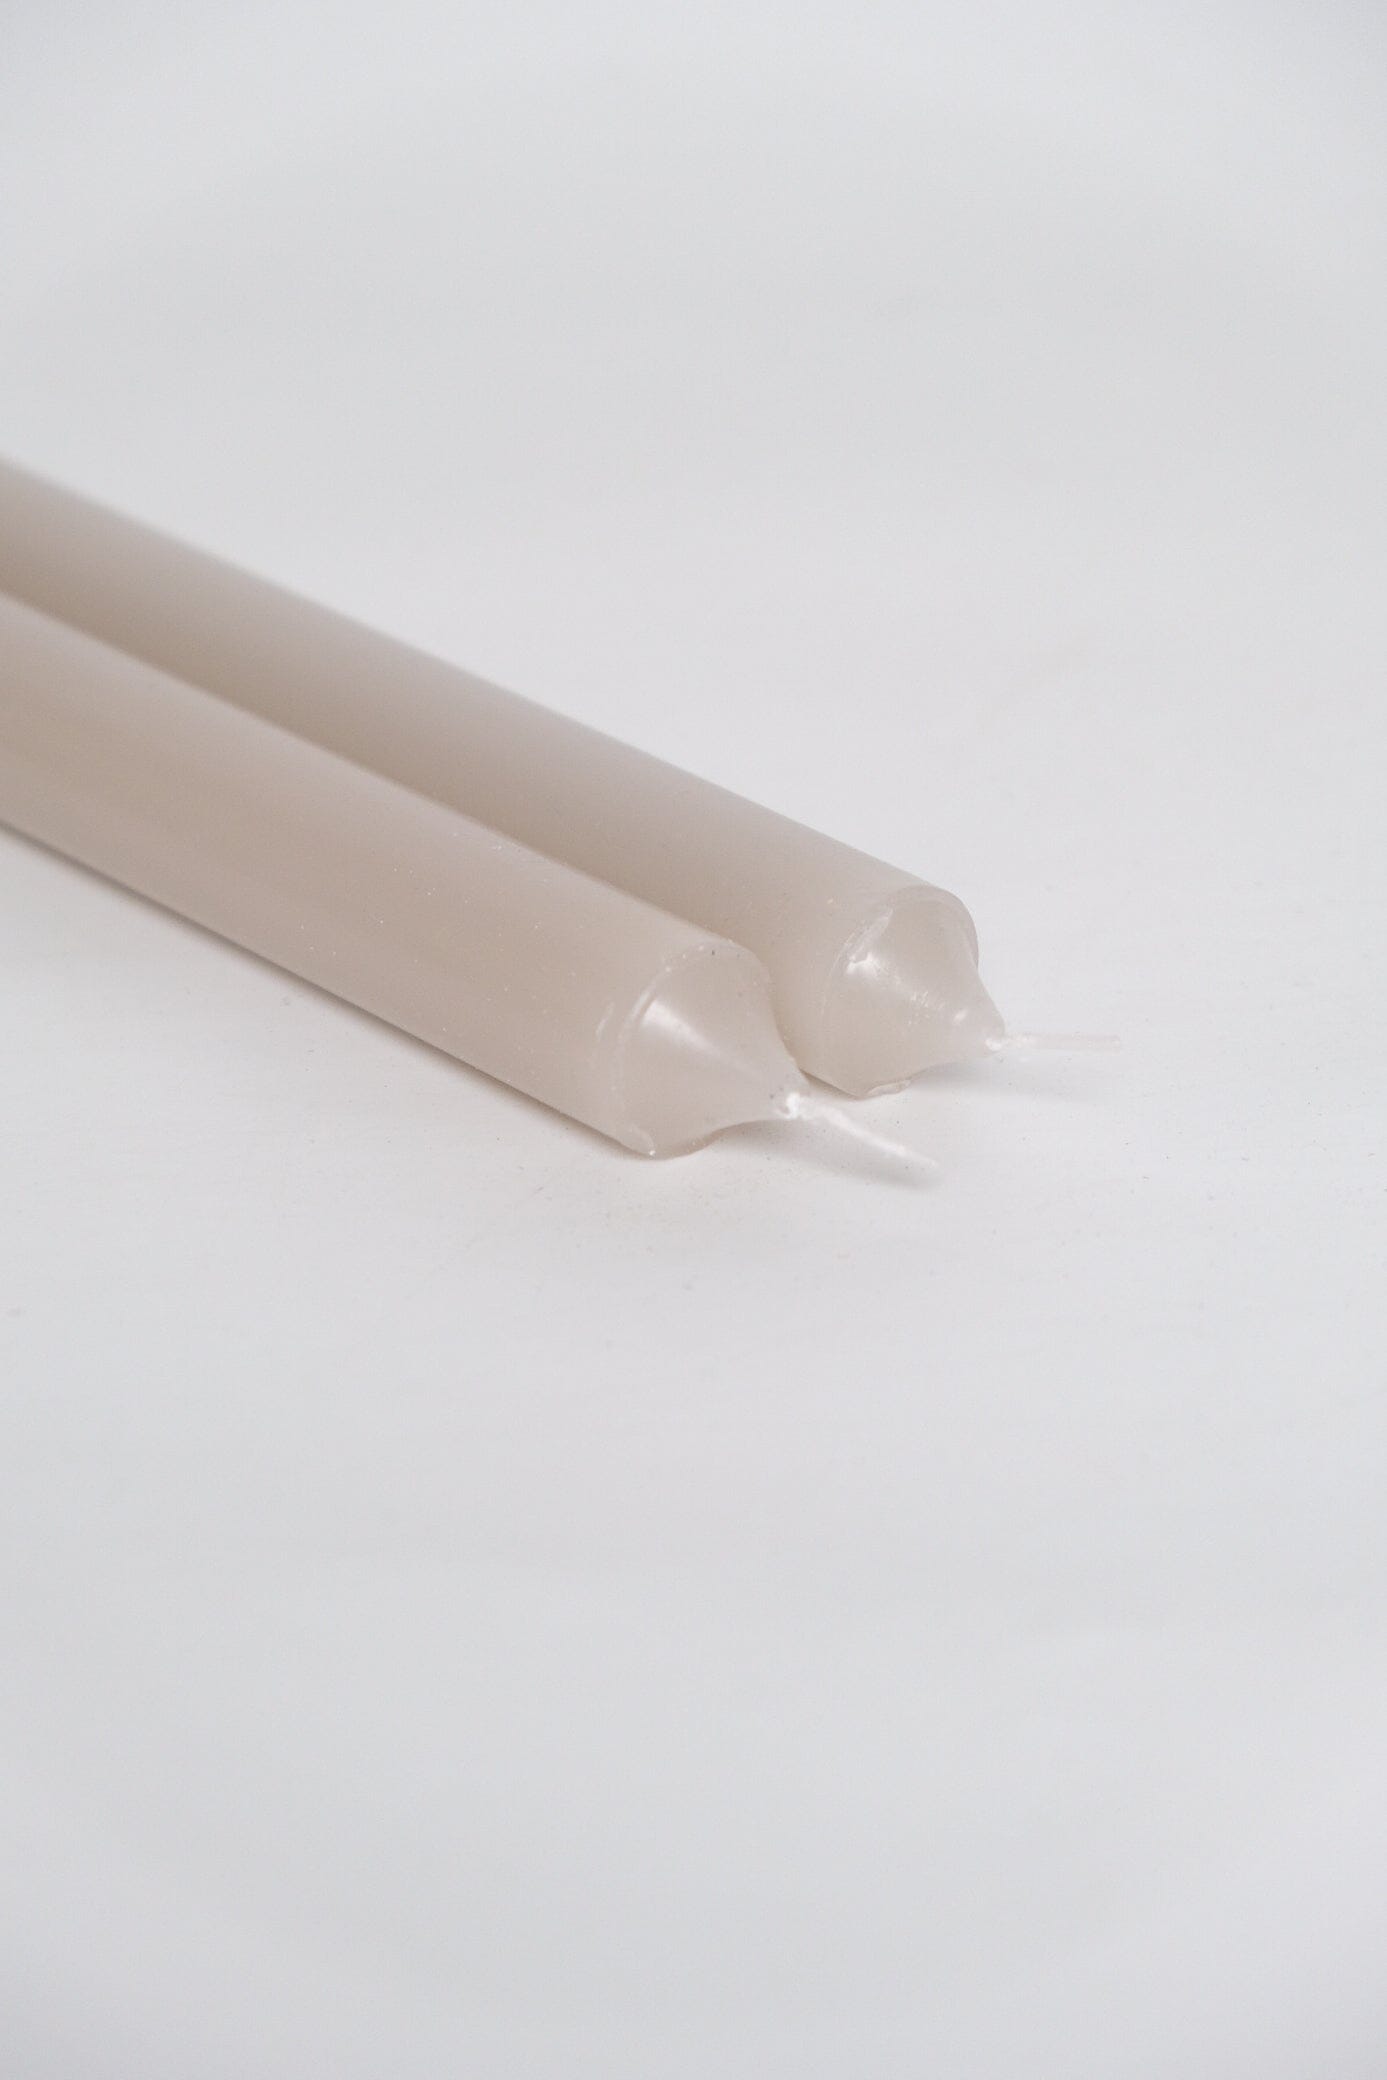 Taper Candle set of 2 - Cloud White candles Twenty Third by Deanne 